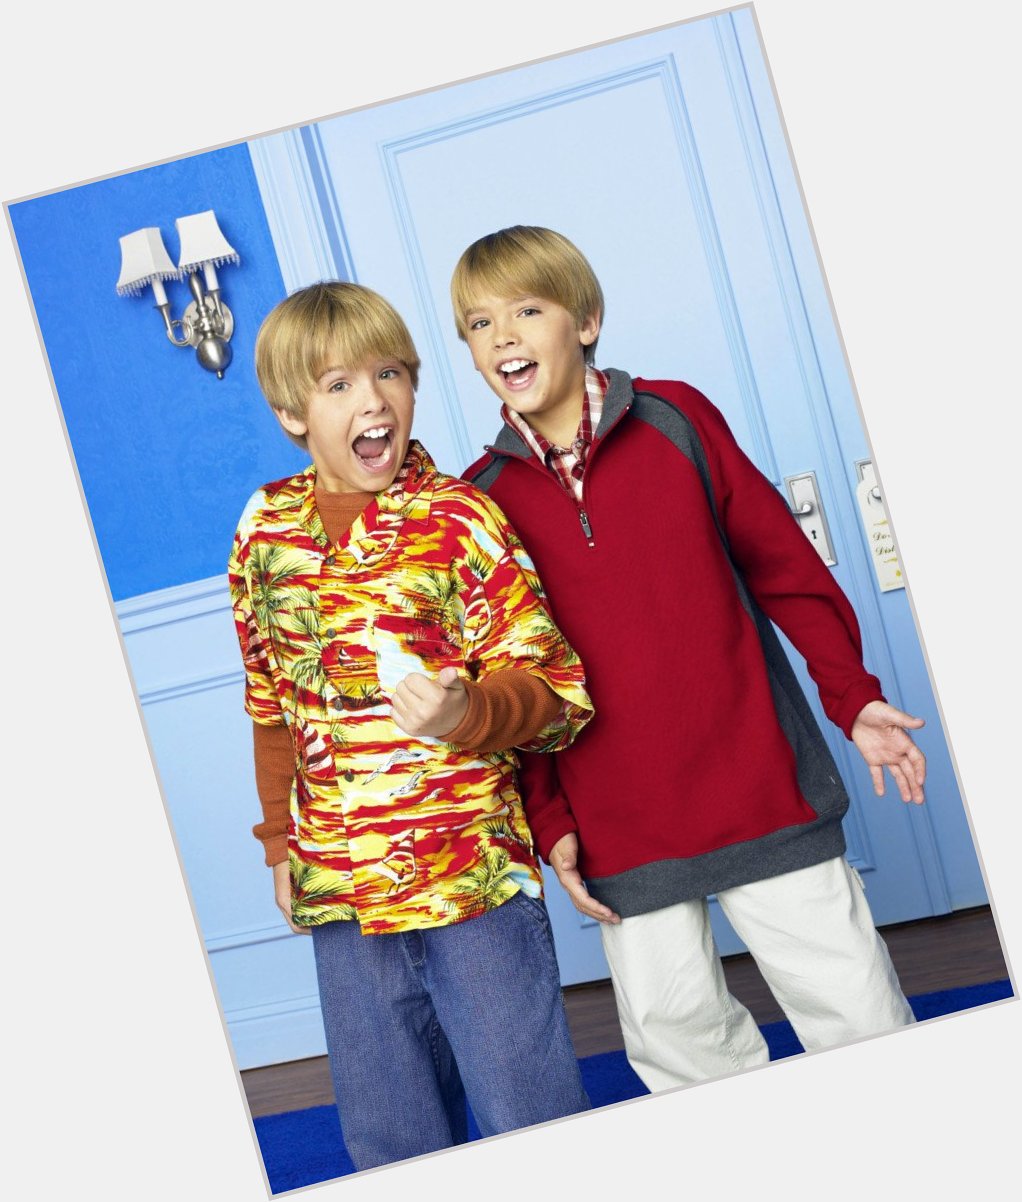 Happy 27th Birthday to Dylan and Cole Sprouse! 